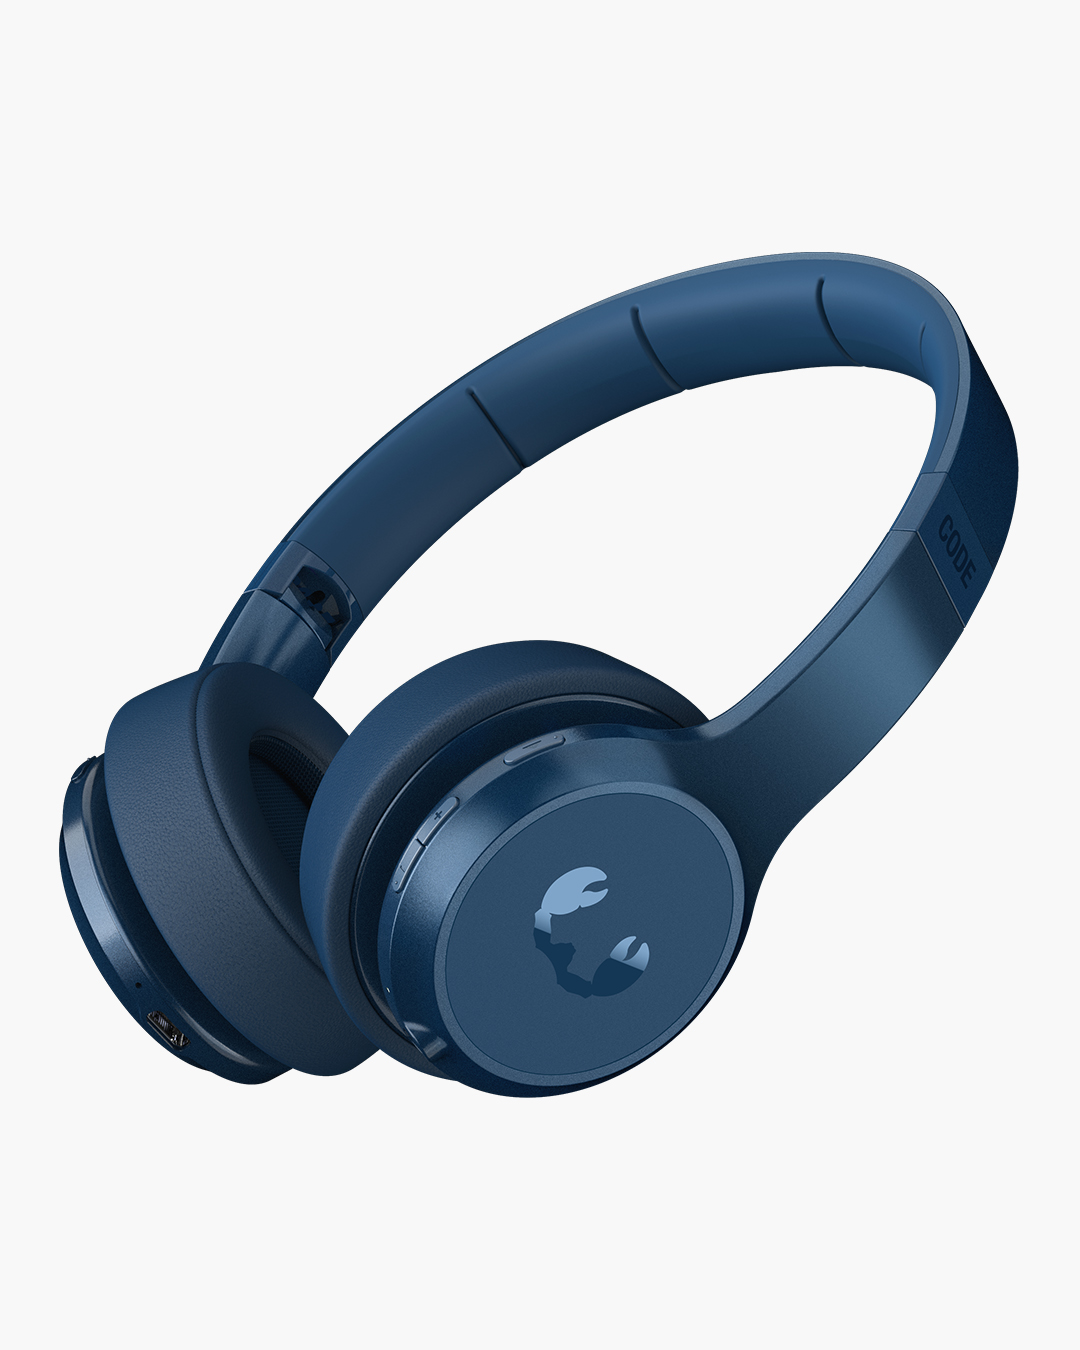 Fresh 'n Rebel - Code ANC - Wireless on-ear headphones with active noise cancelling - Steel Blue